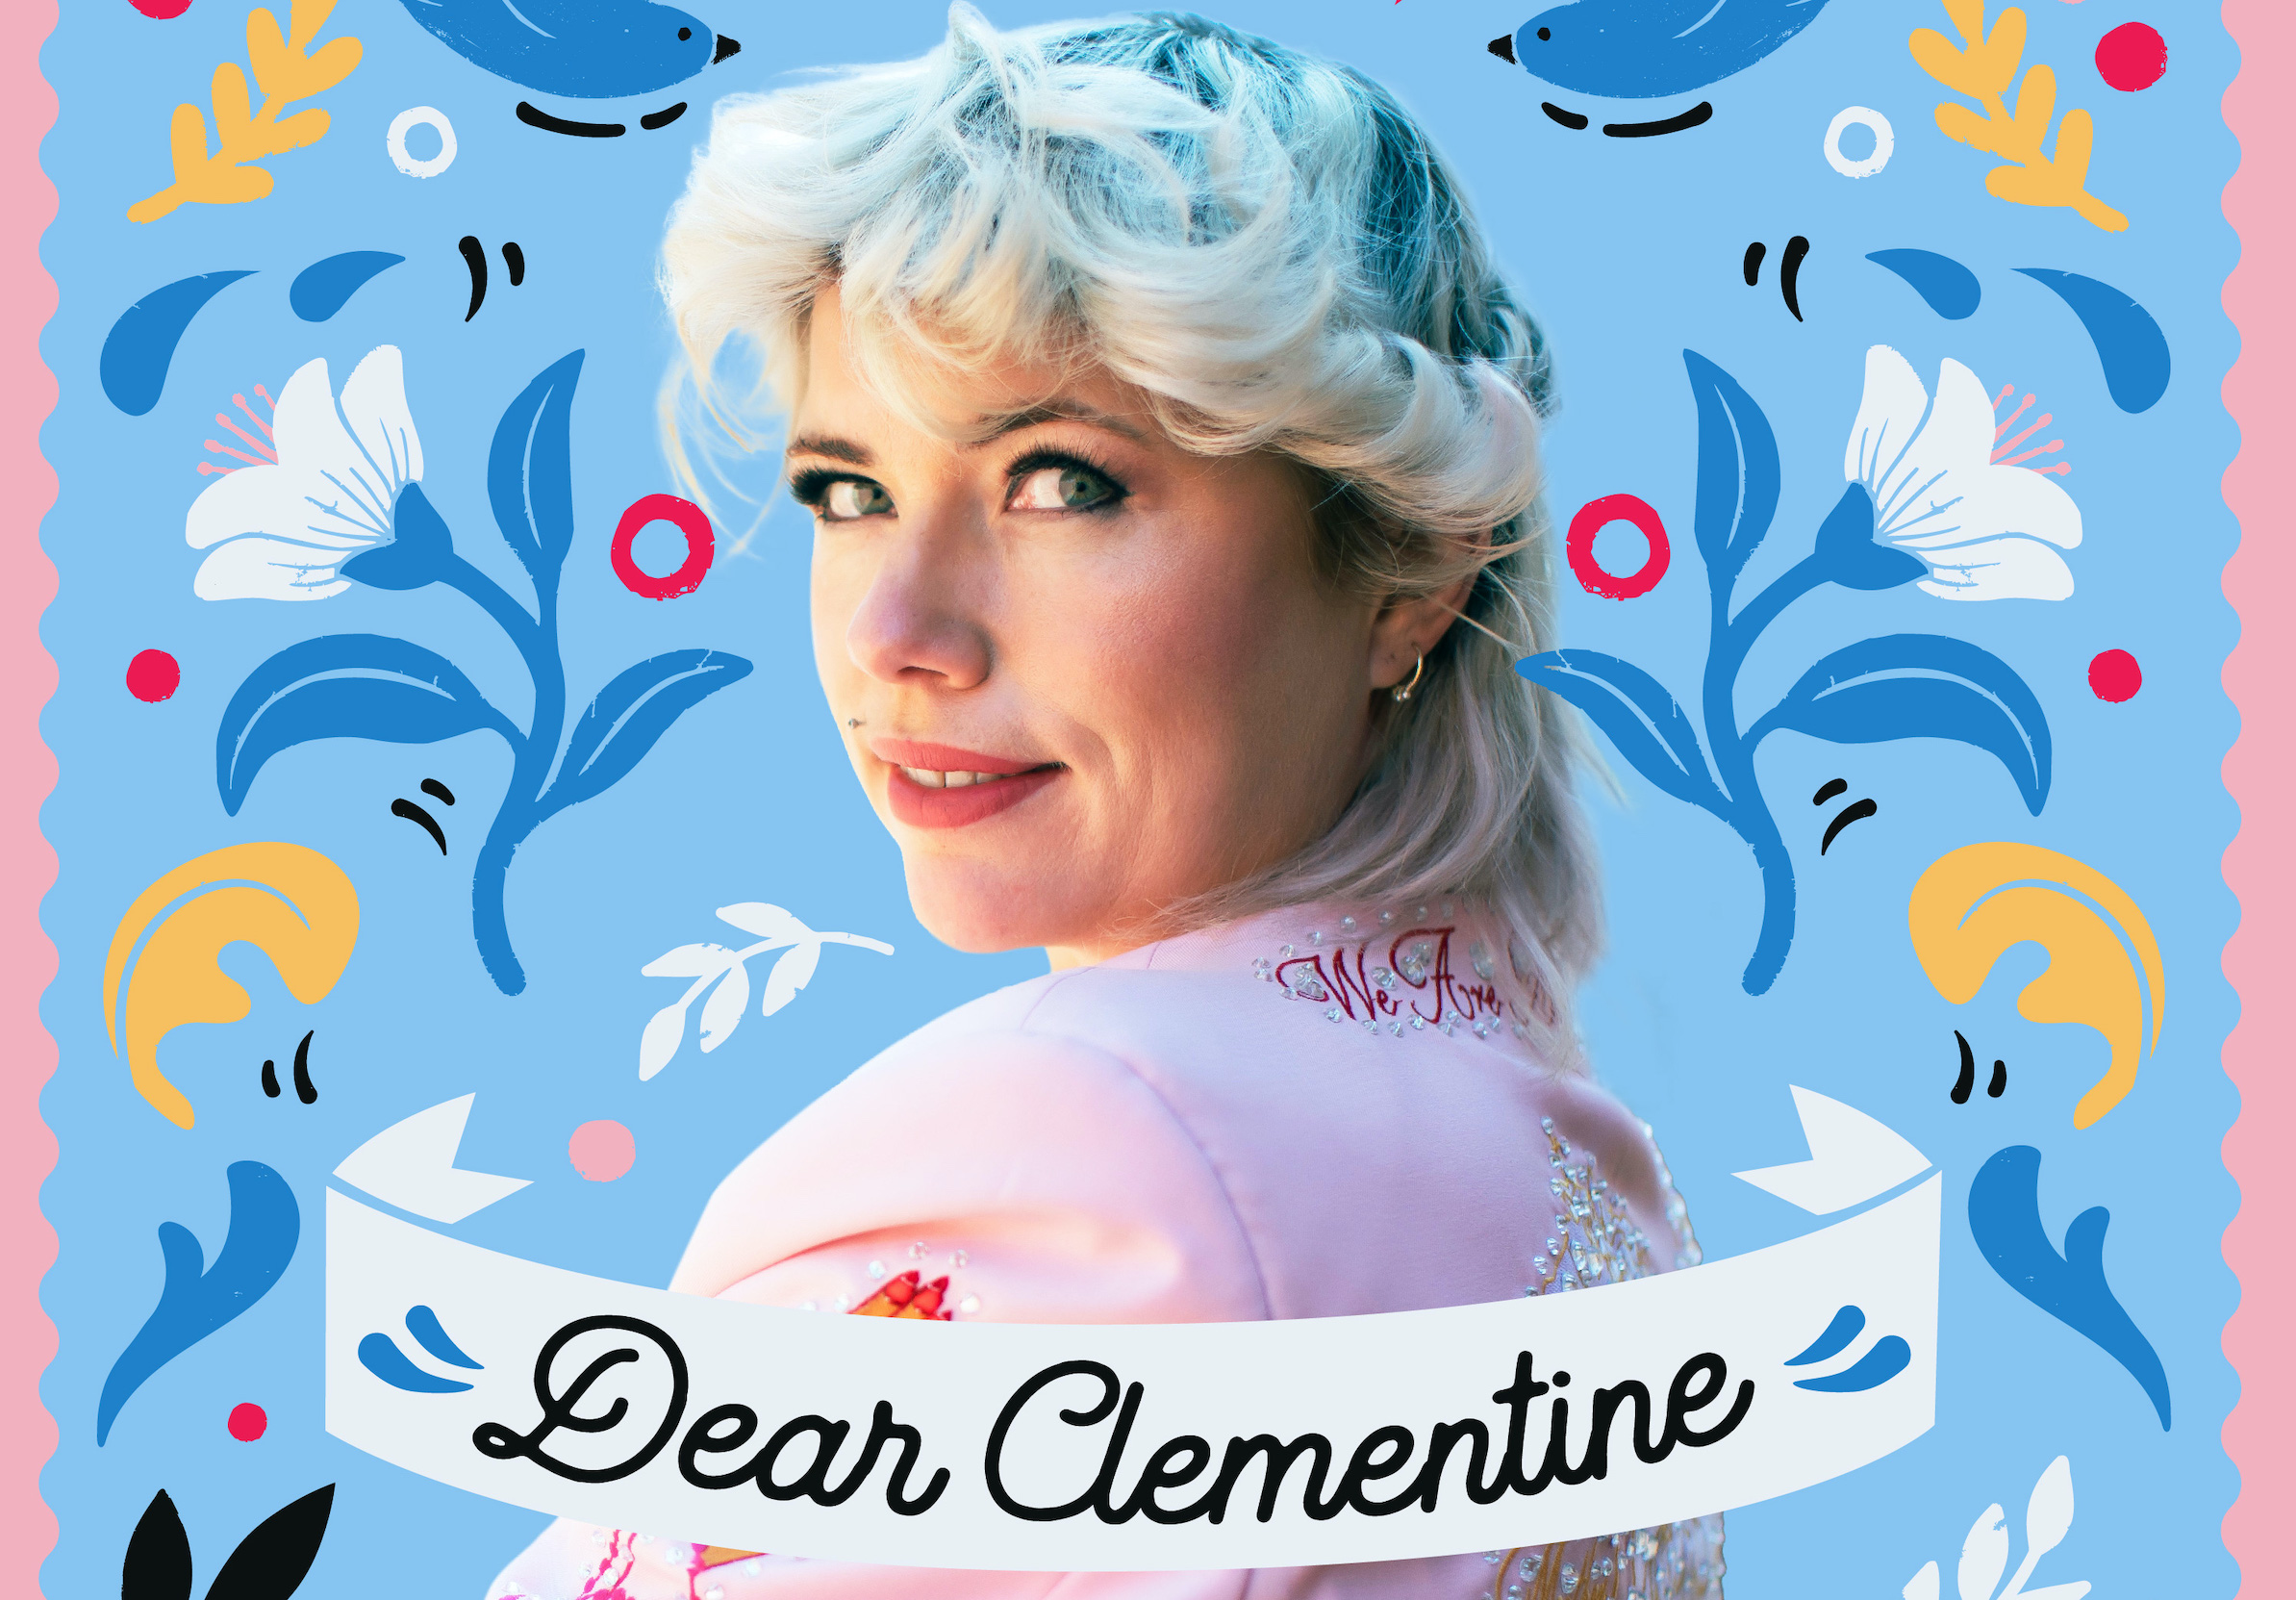 Clementine Ford's podcast Dear Clementine